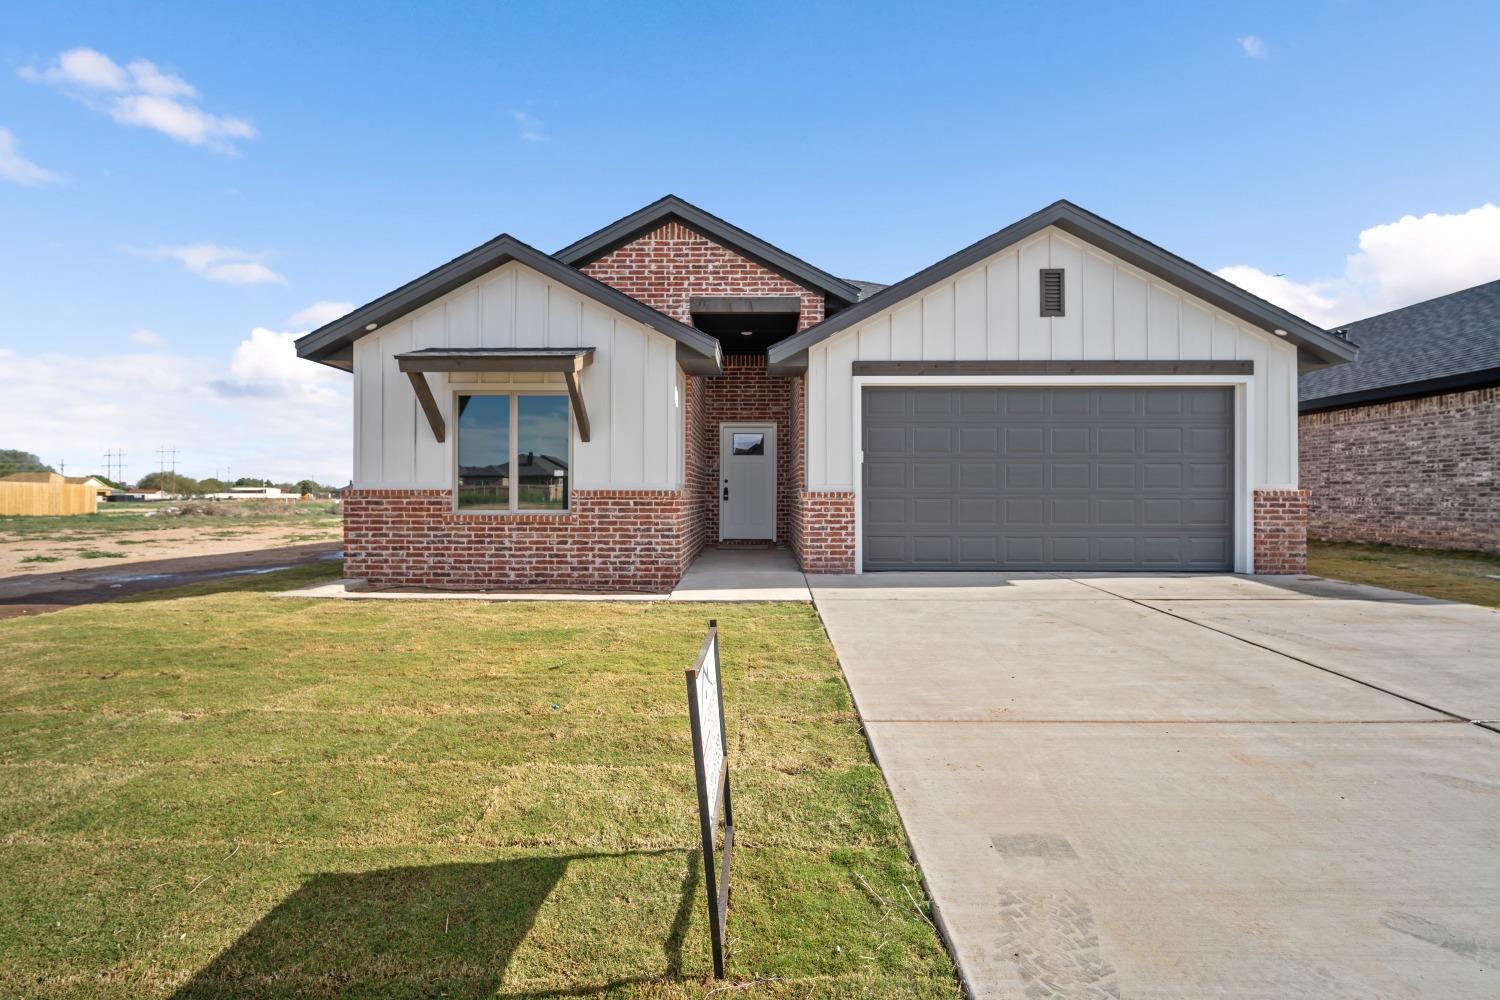 Burgamy Park is a new Lubbock community , just minutes away from grocery stores like United Supermarkets, Walmart and Costco. Terra Vista Middle School, and North Ridge Elementary. Close to the medical district and Texas Tech University.  While enjoying all these amenities you can cherish living in this Truitt Garland Construction home.  Rather you have a family or looking for a place to attend school.  This home with it's trending color, and tile flooring open concept, gorgeous fireplace, and covered patio, will serve all your needs on your check list.  Make an appointment to come and check it out for yourself.  We are extremely easy to work with.   Plus you have the builder's 1-2-10 warranty.